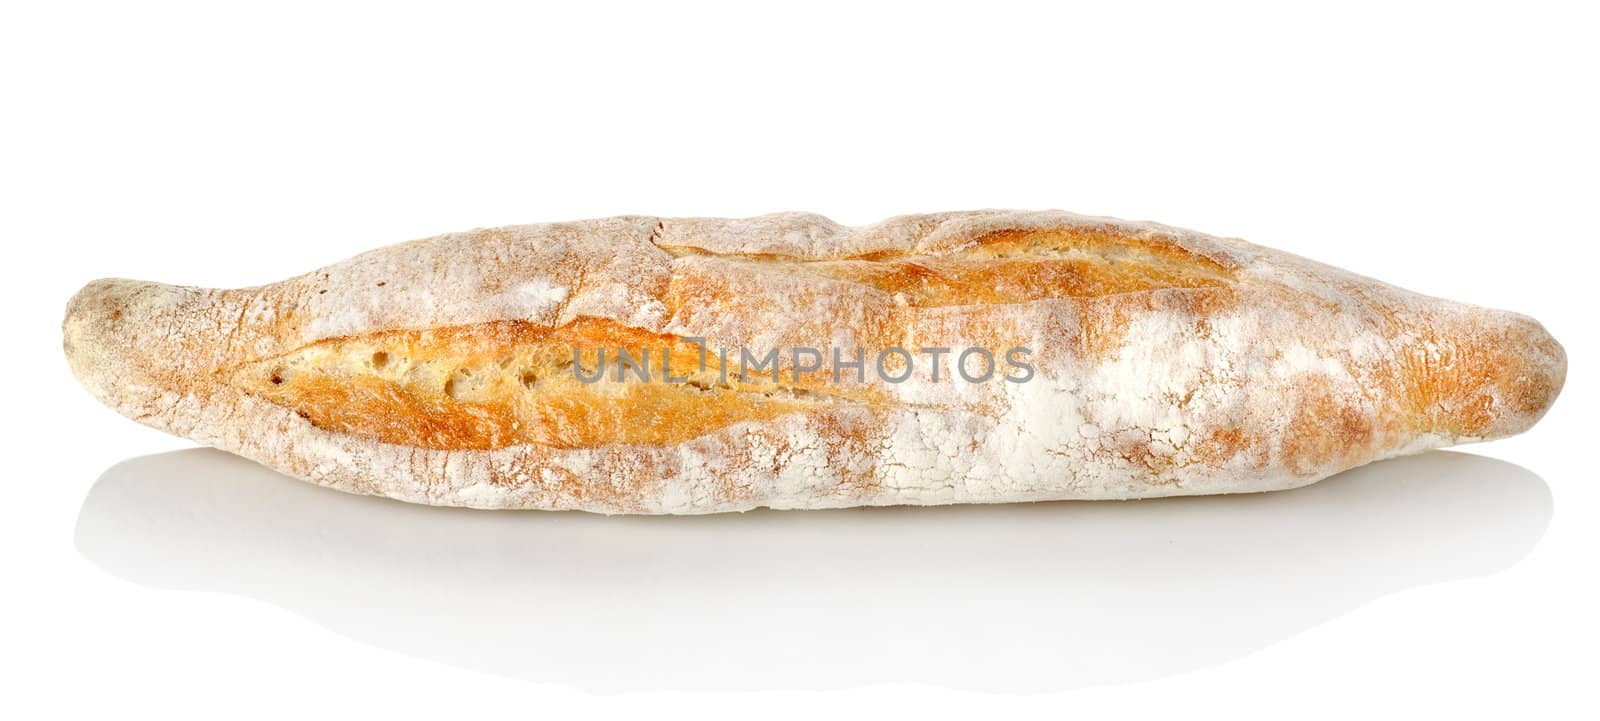 French bread by Givaga